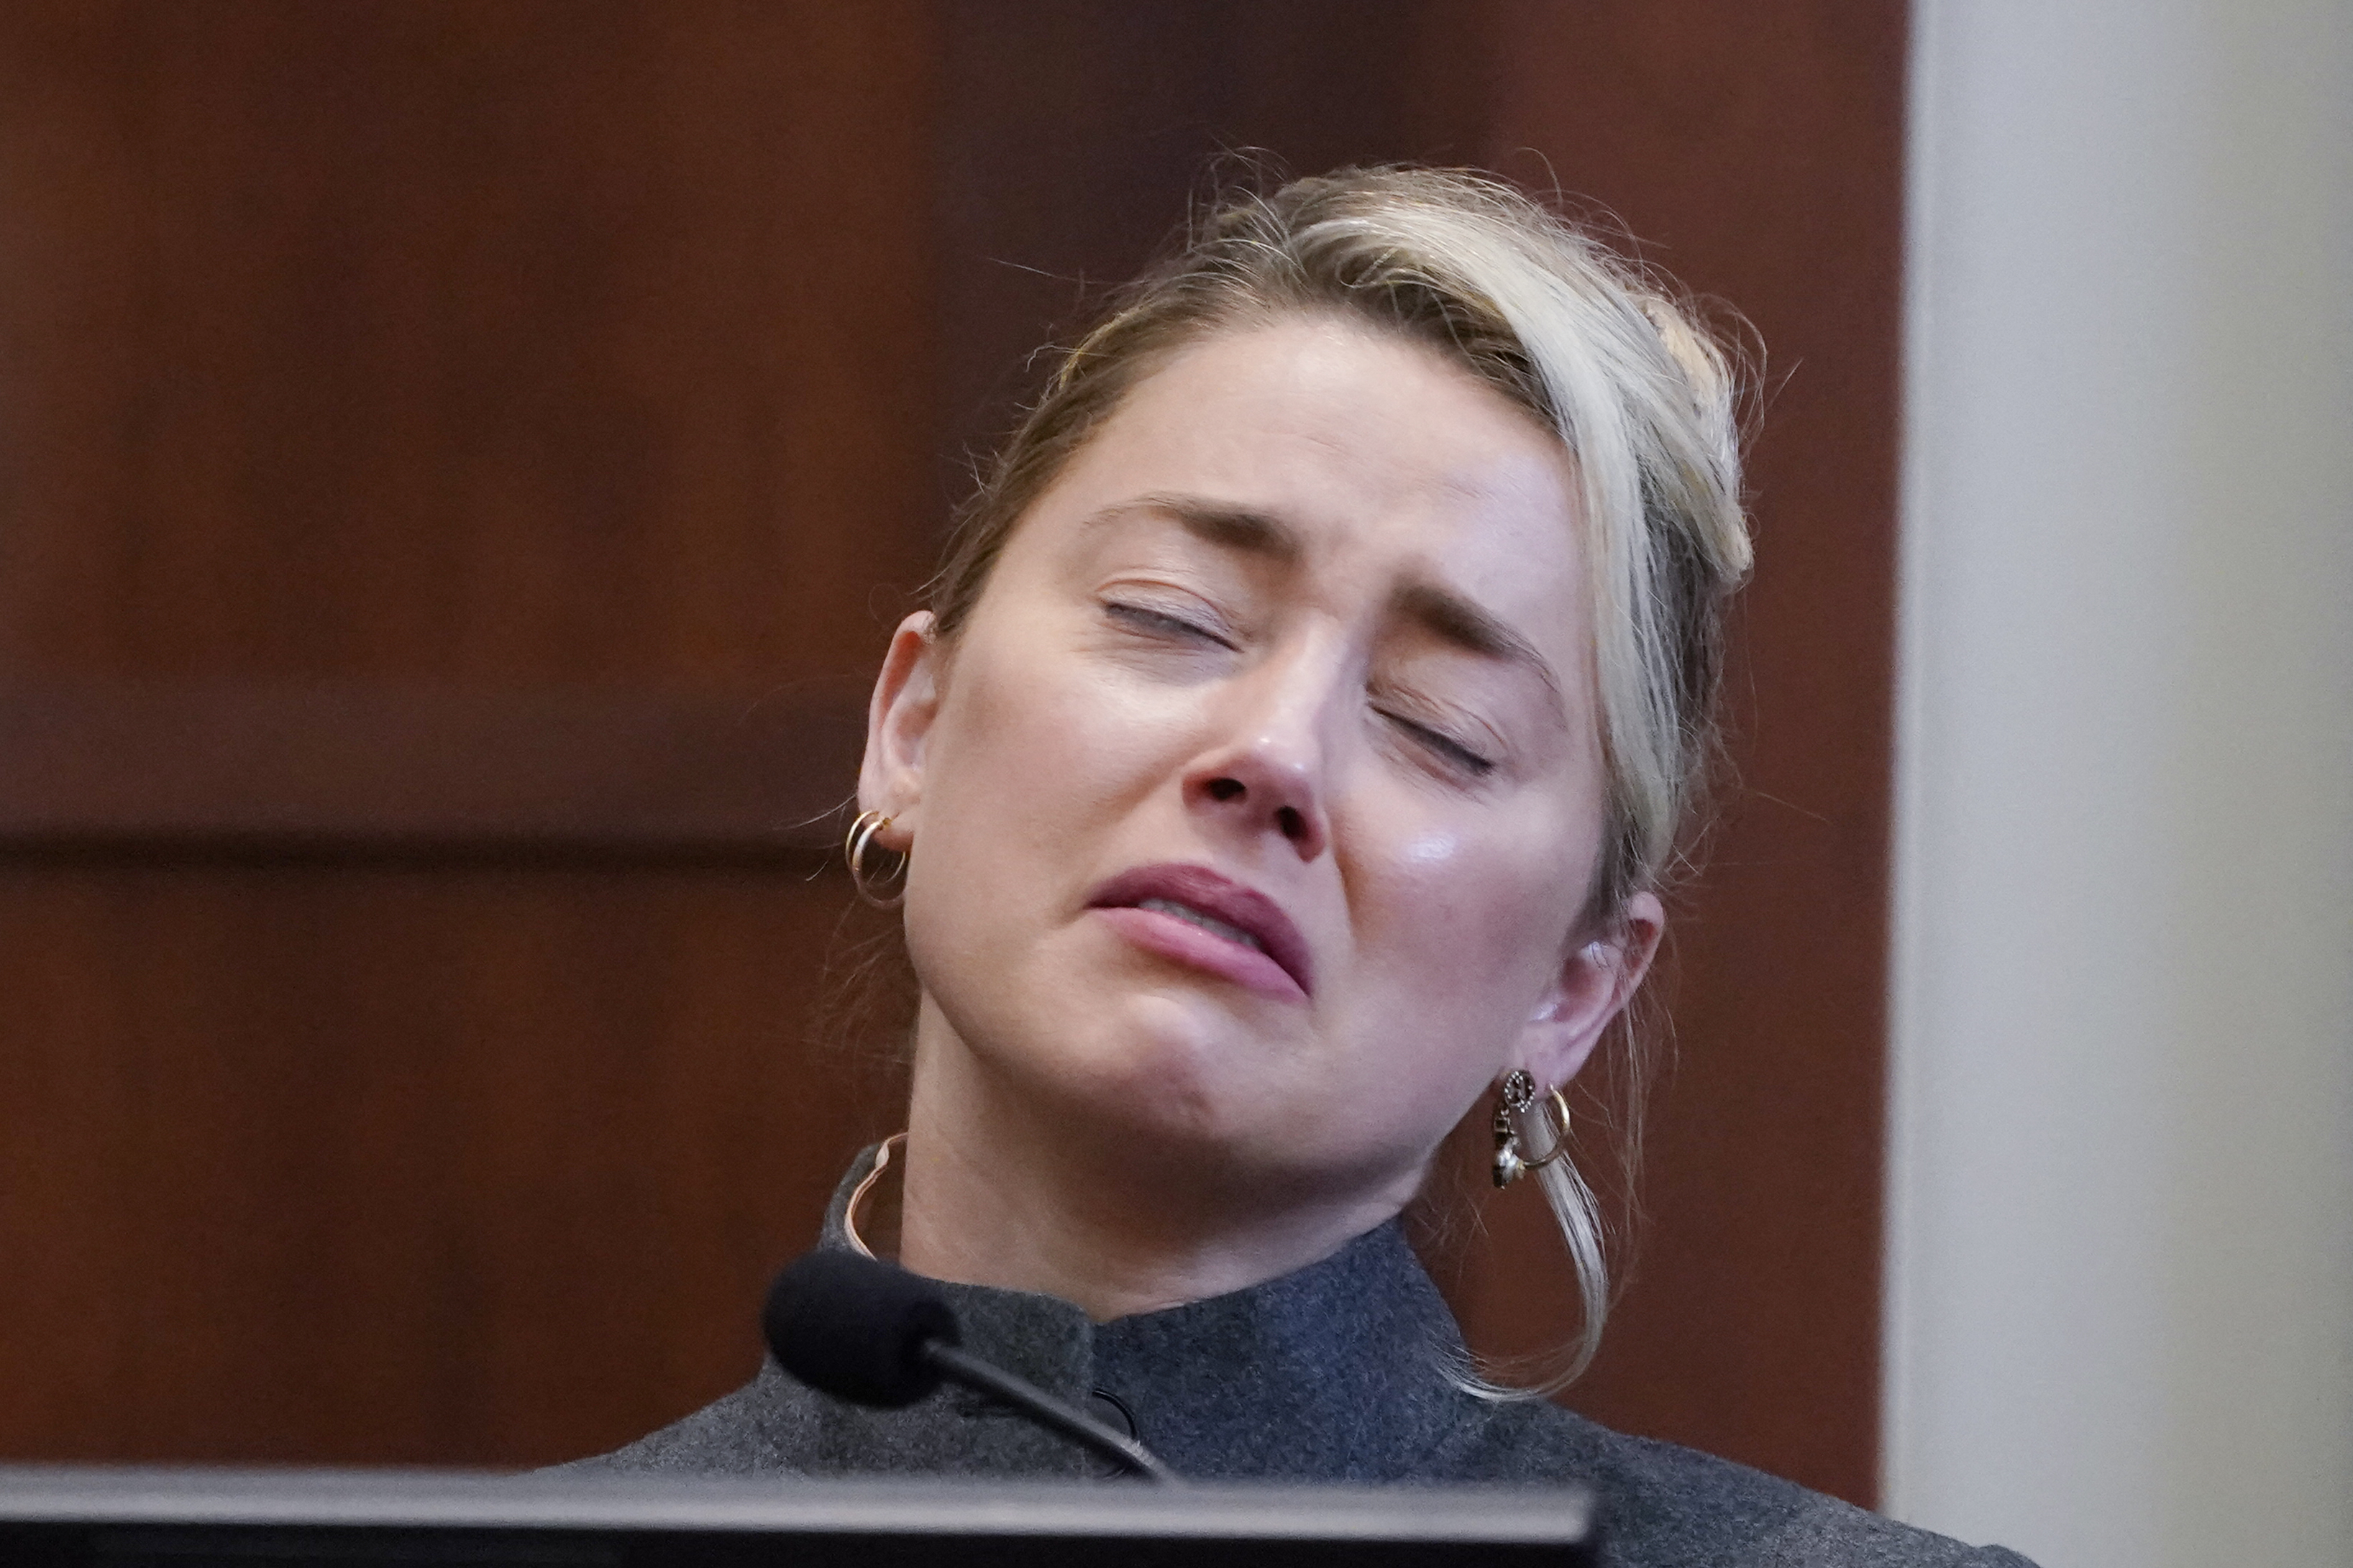 Amber crying in court